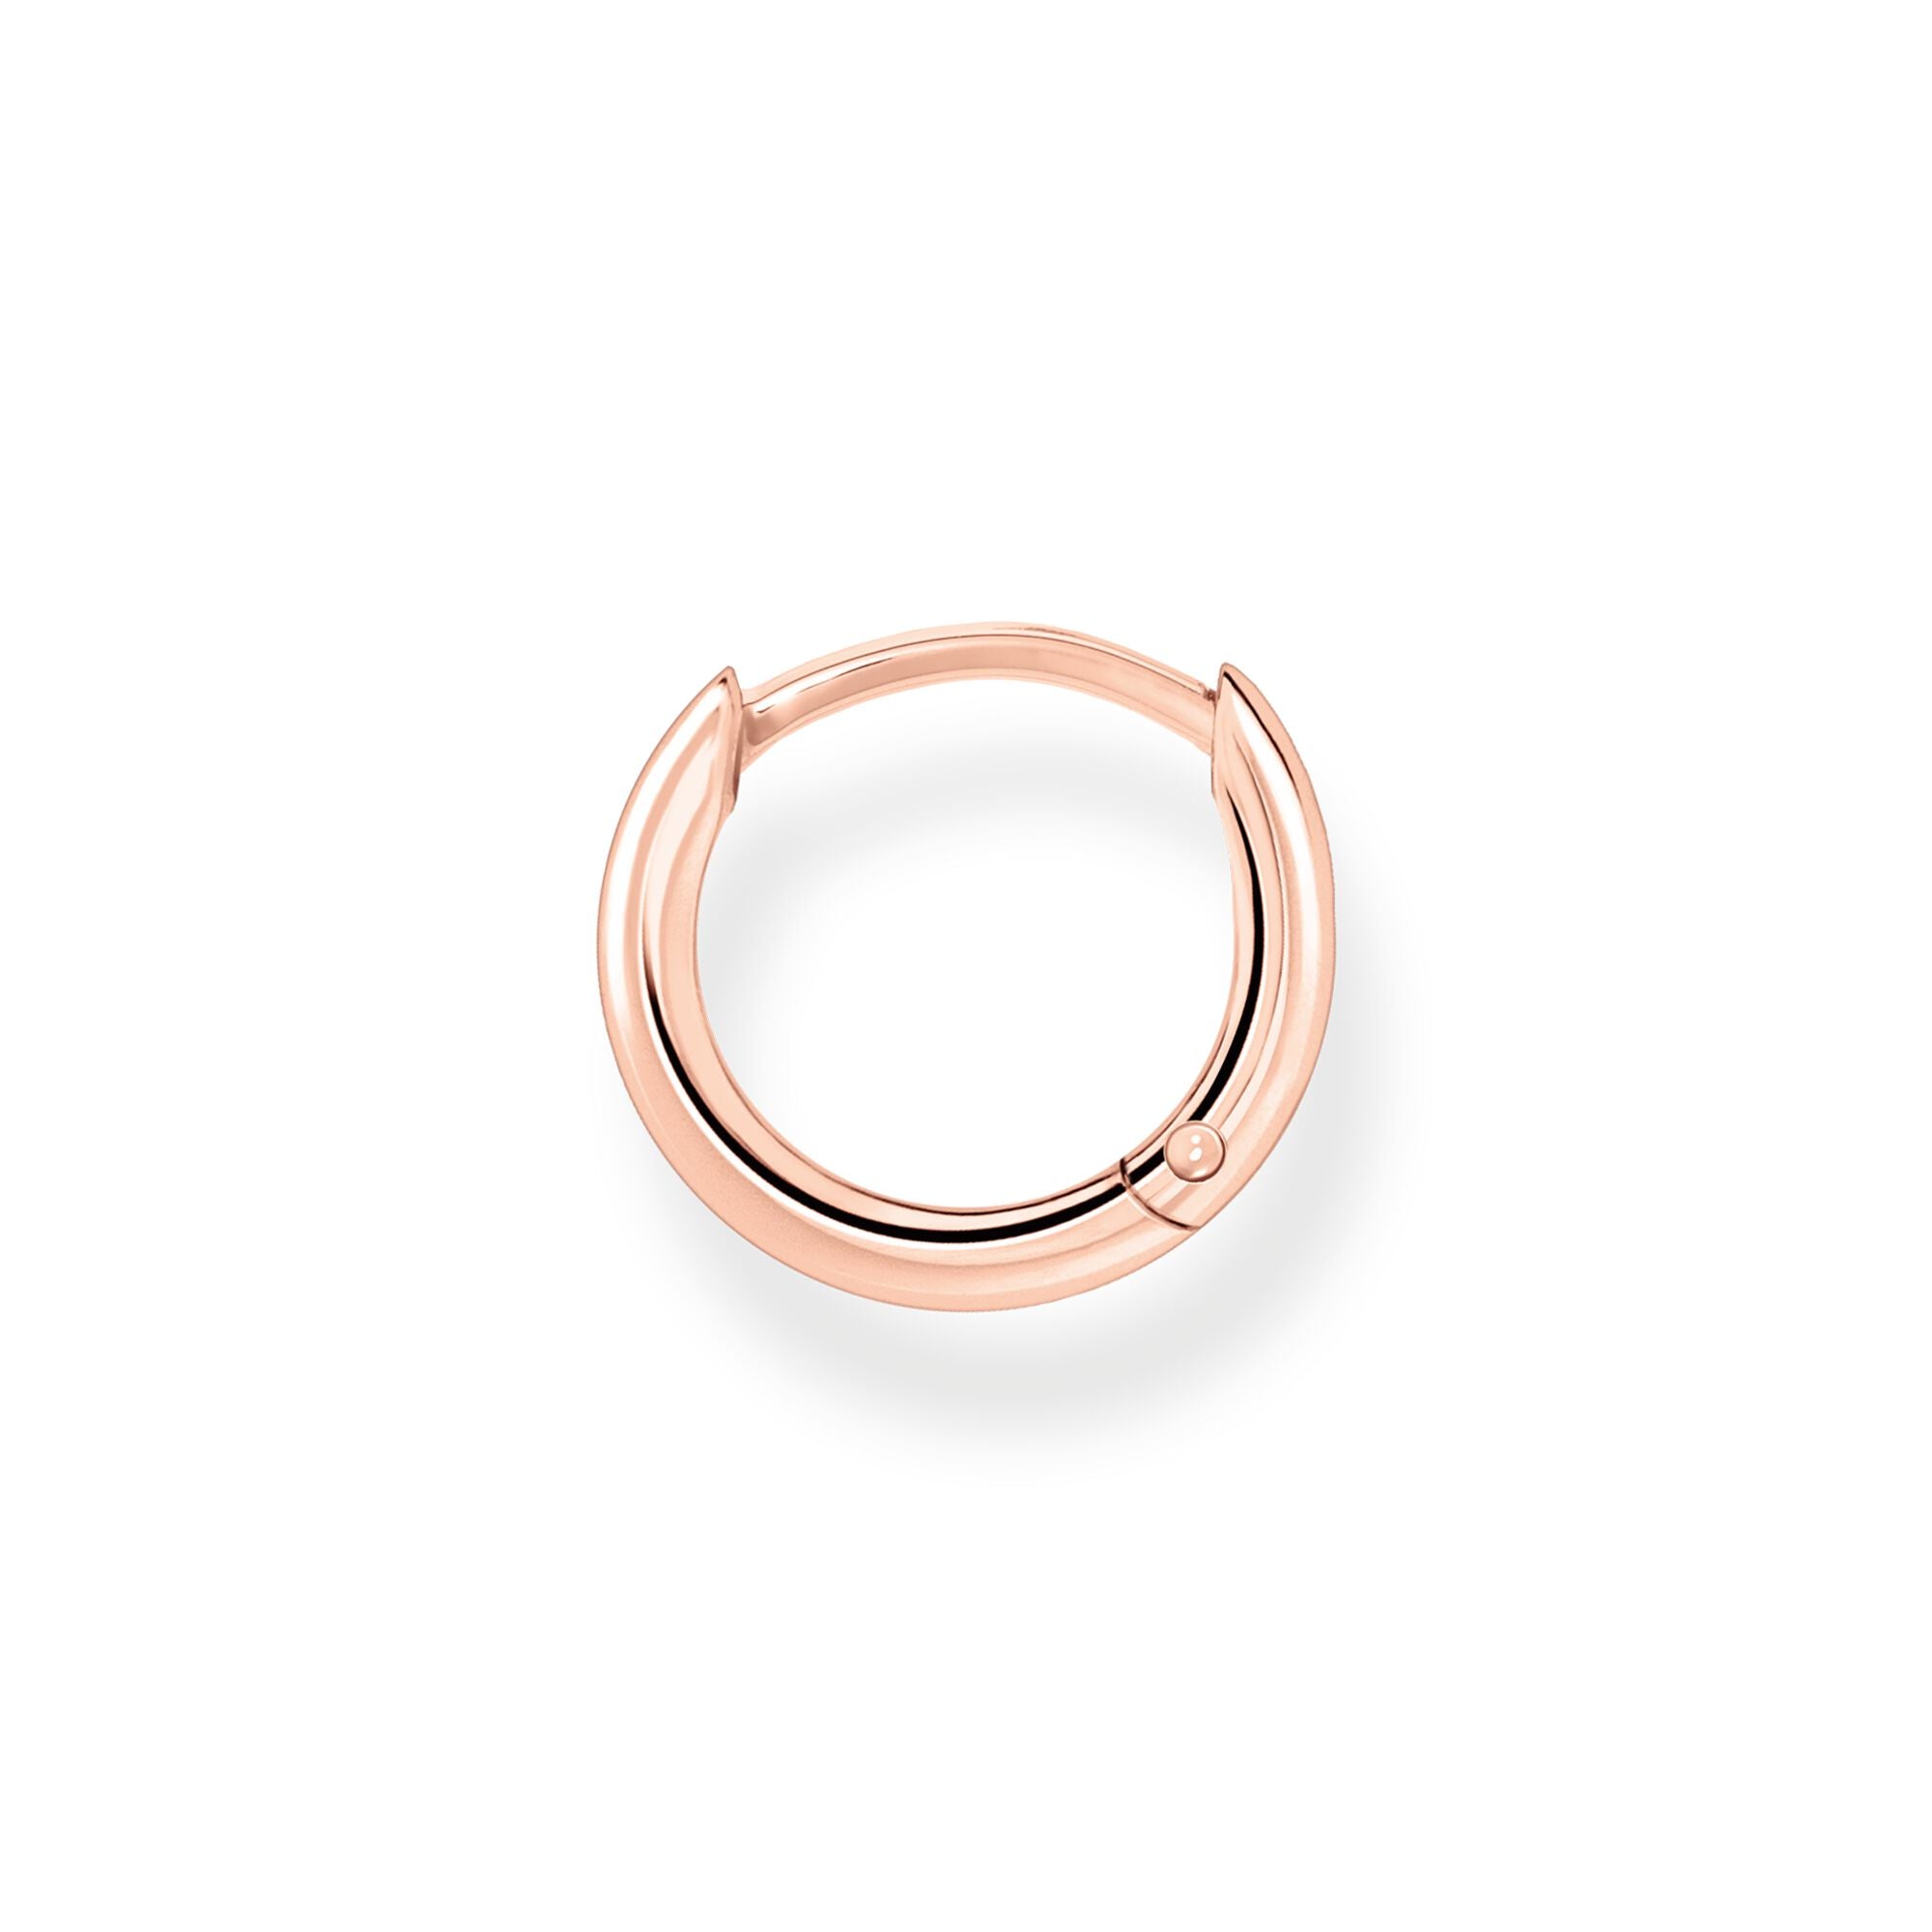 Thomas Sabo, Sterling Silver,  Rose Gold Plated, Single Hoop Earring, 13.5mm, Ottawa